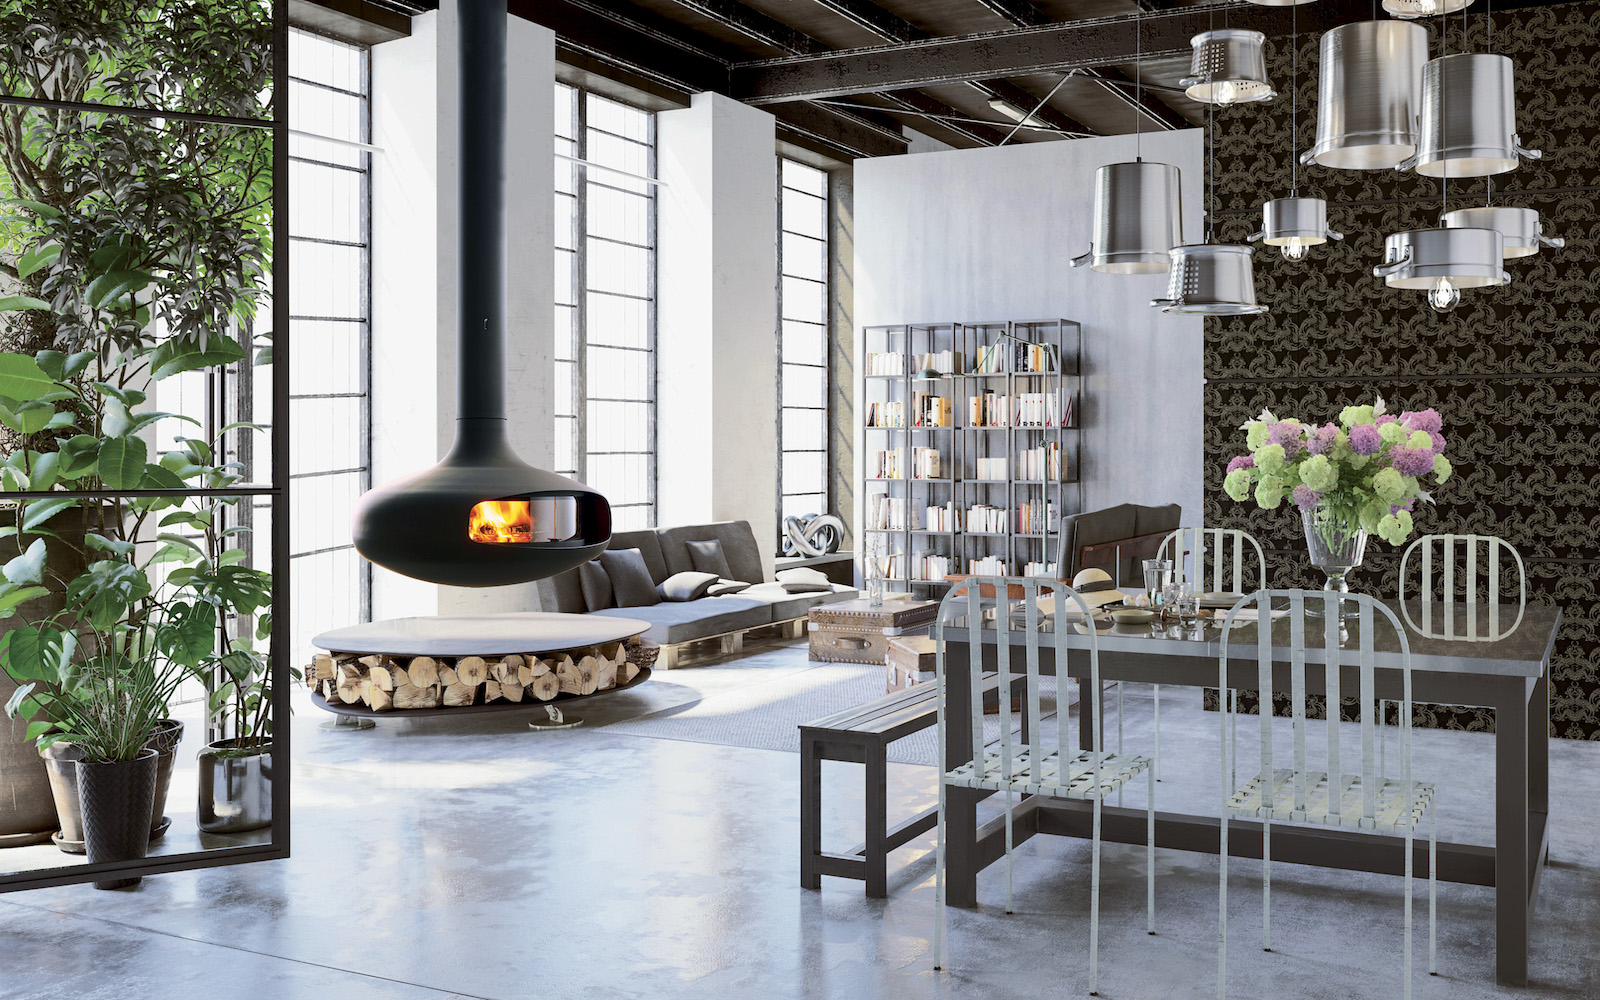 Home interior industrial style with fireplace